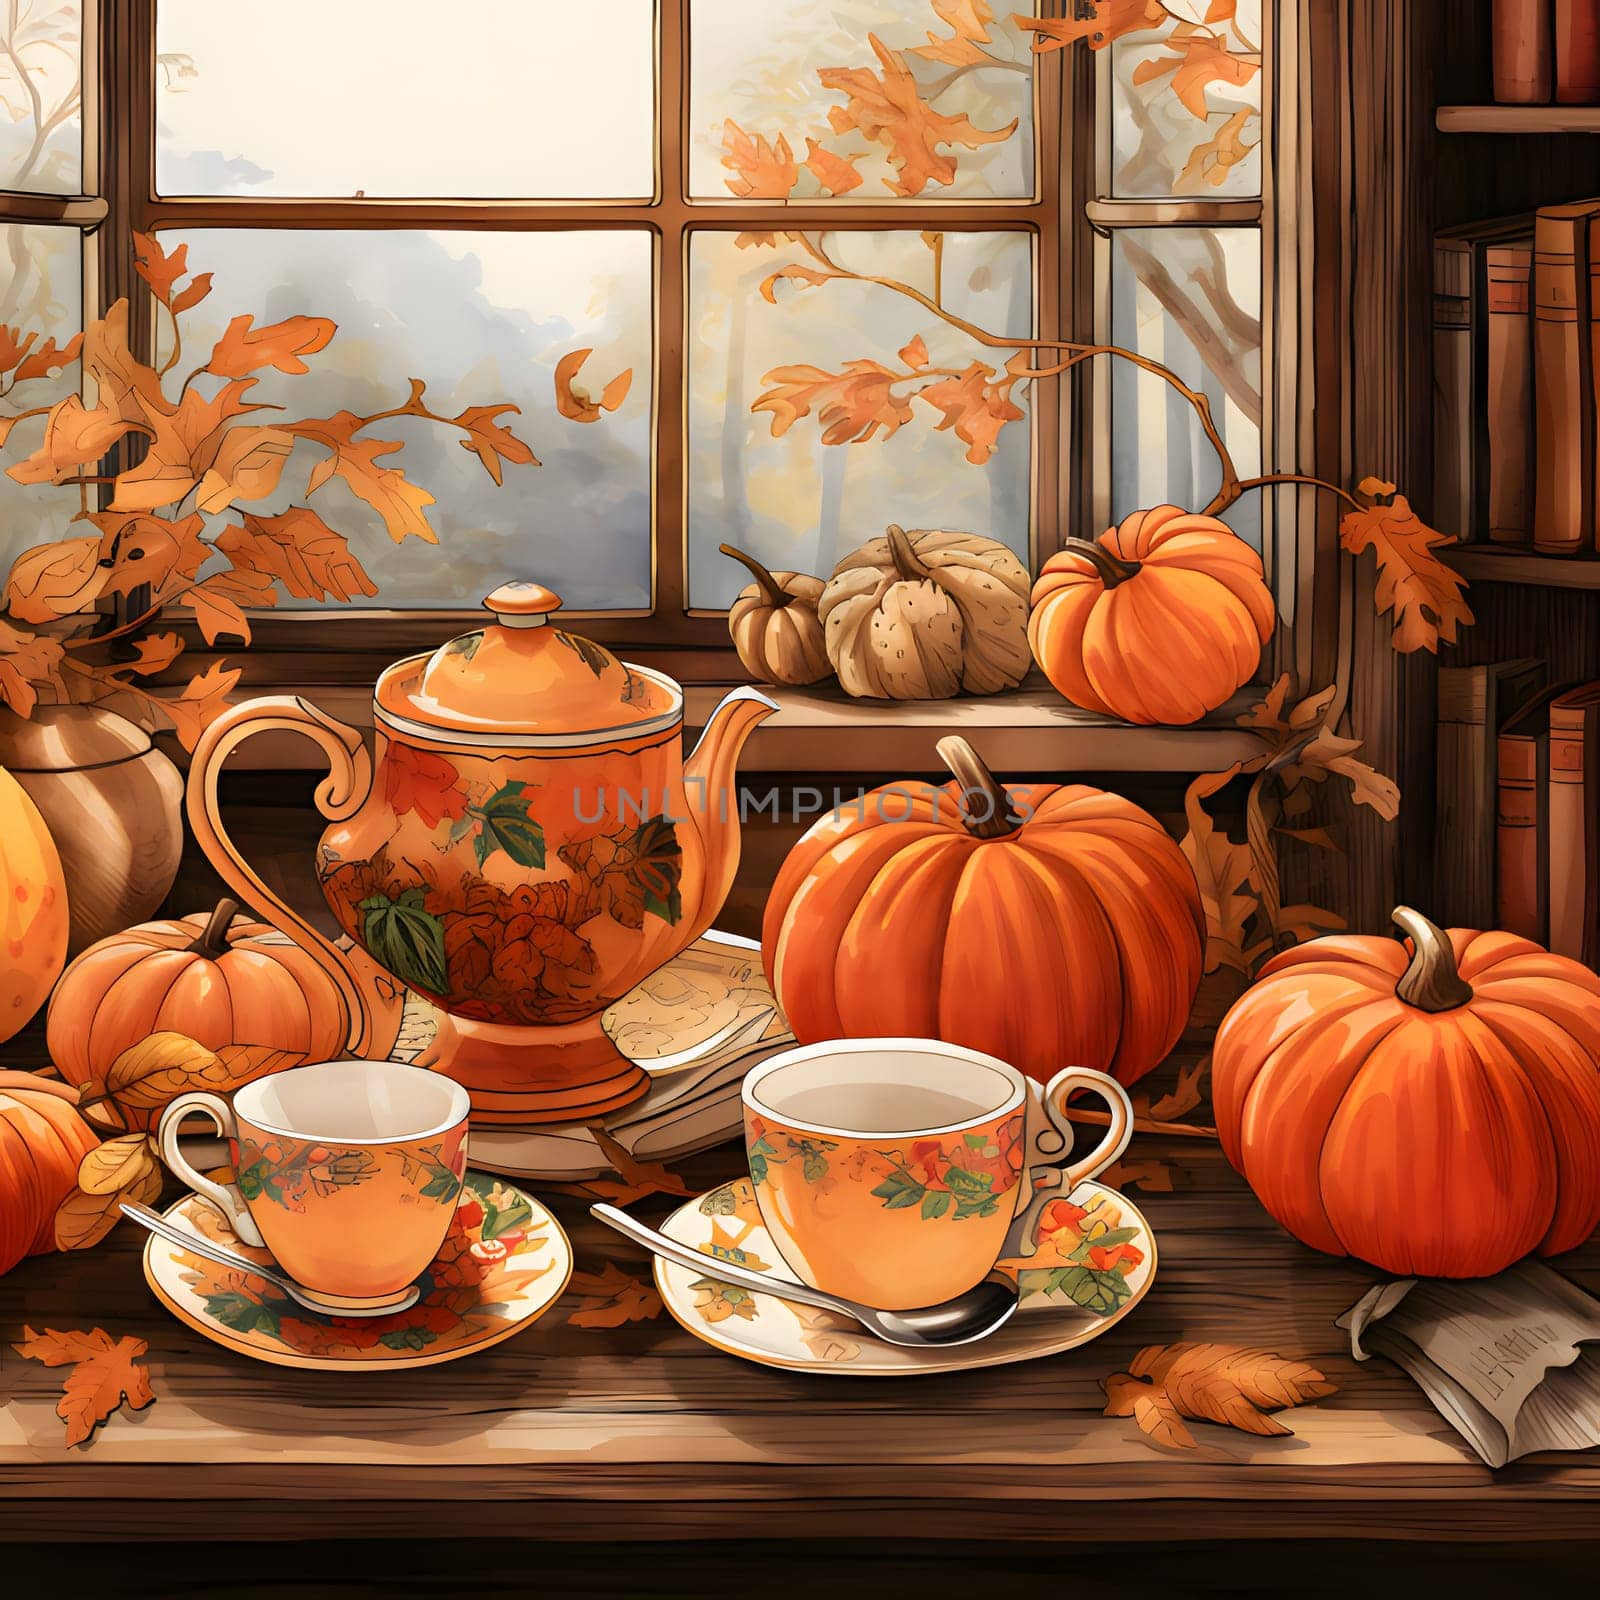 Illustration wooden desk and on it coffee cups, all around pumpkins, books, autumn leaves. Pumpkin as a dish of thanksgiving for the harvest. An atmosphere of joy and celebration.